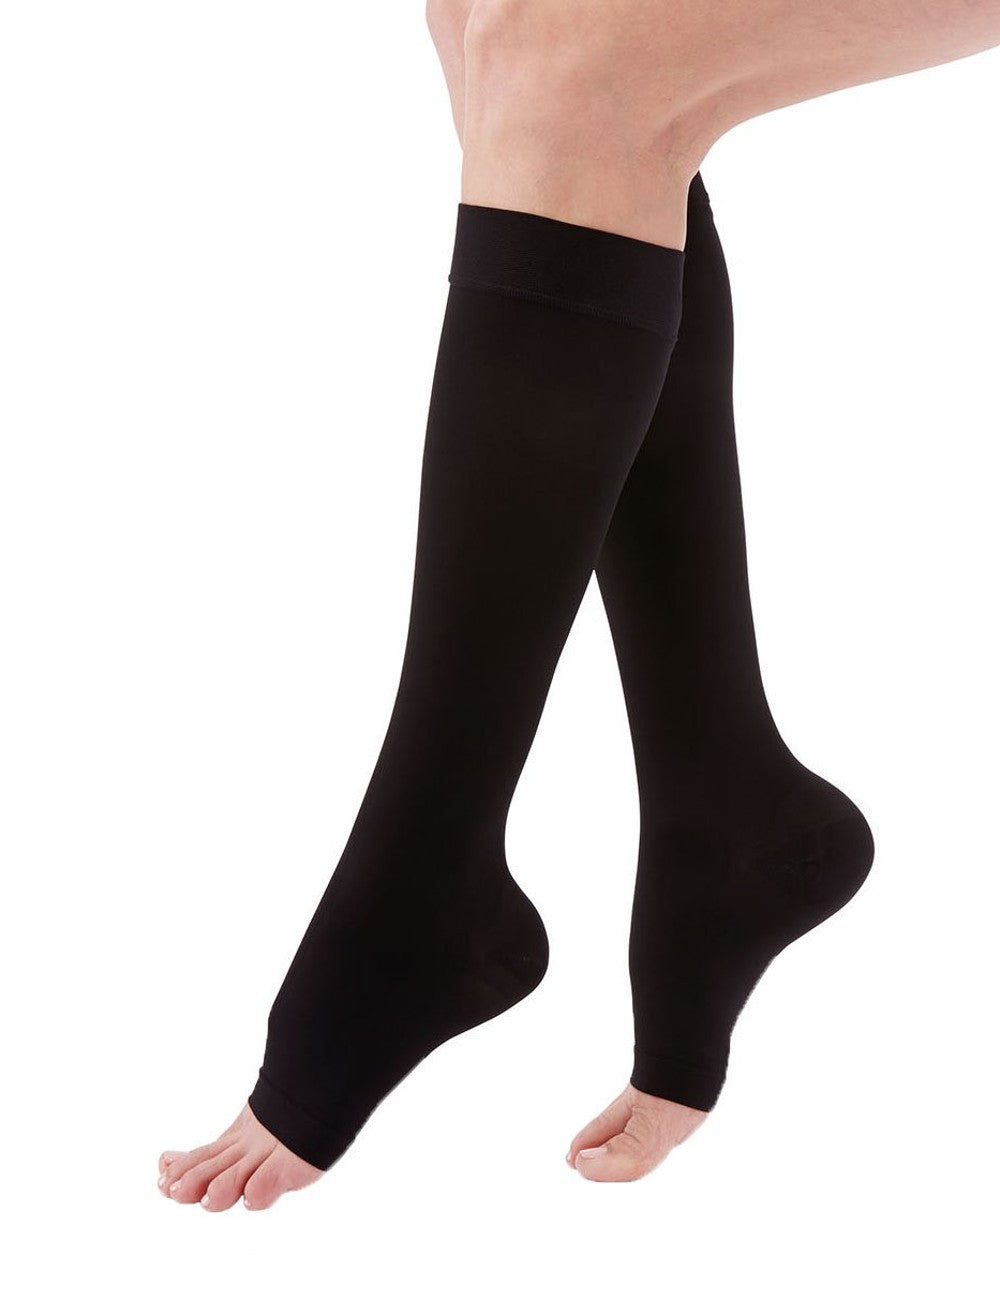 Buy FOVERA Varicose Veins Compression Stockings (Below Knee), Open Toe knee  length Sleeves for Swelling, Edema, Sore & Aching Legs, Pain Relief & Post  Pregnancy, for Men & Women (Size - L